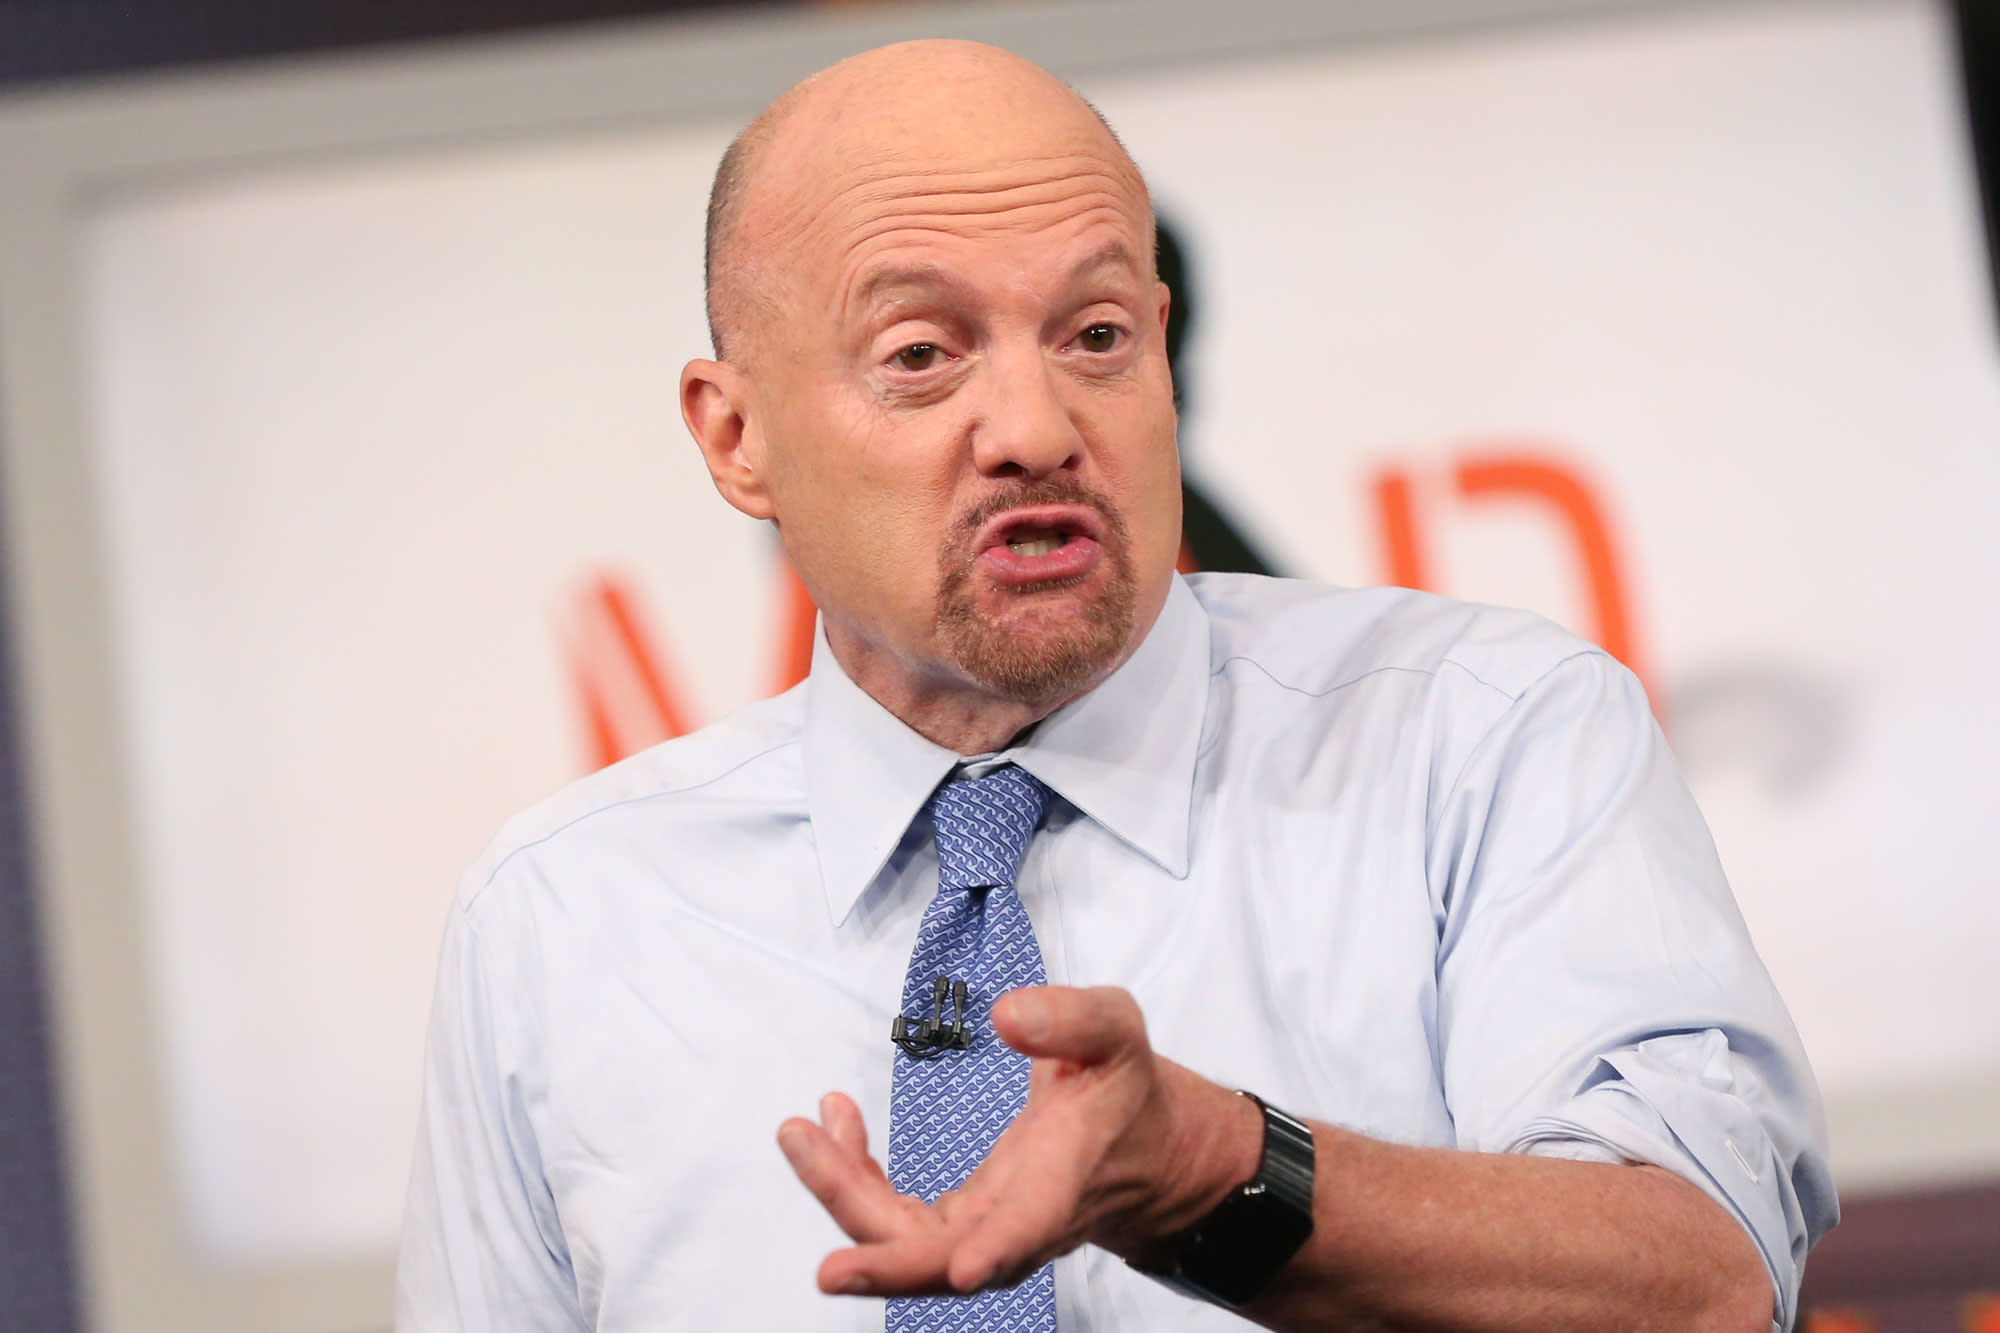 Jim Cramer says the Santa Rally may have started early this year